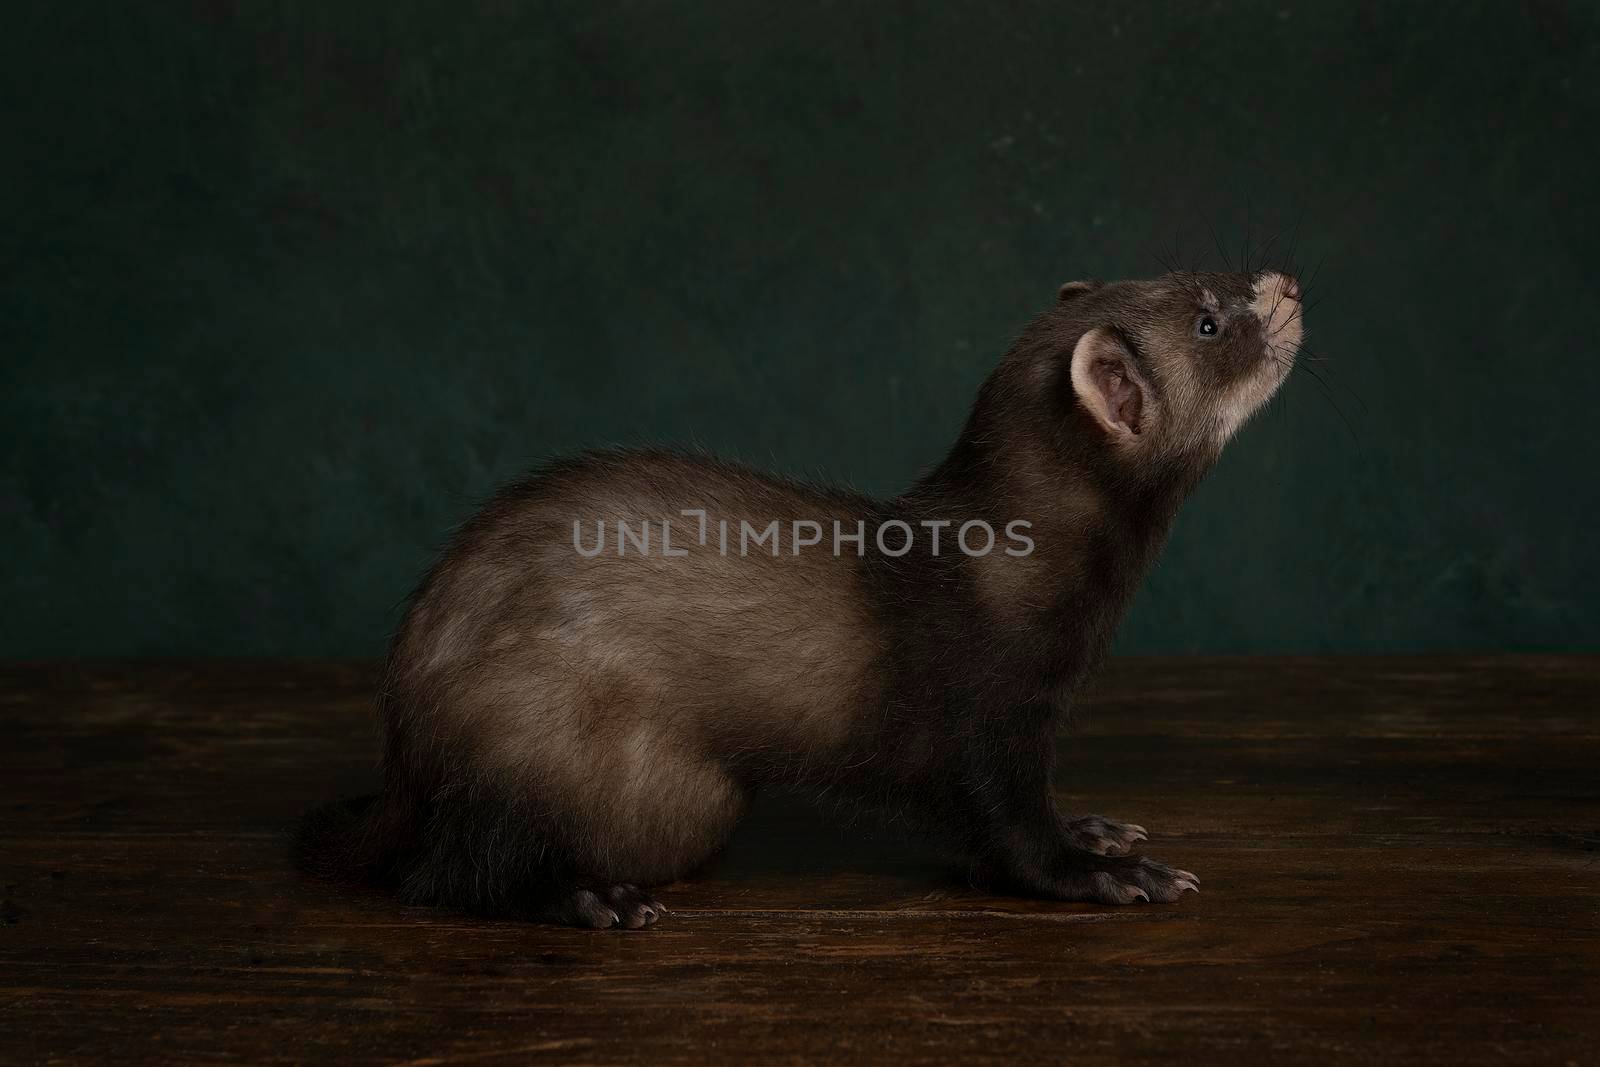 A young ferret or polecat puppy full body in a stillife scene looking up against a green background by LeoniekvanderVliet